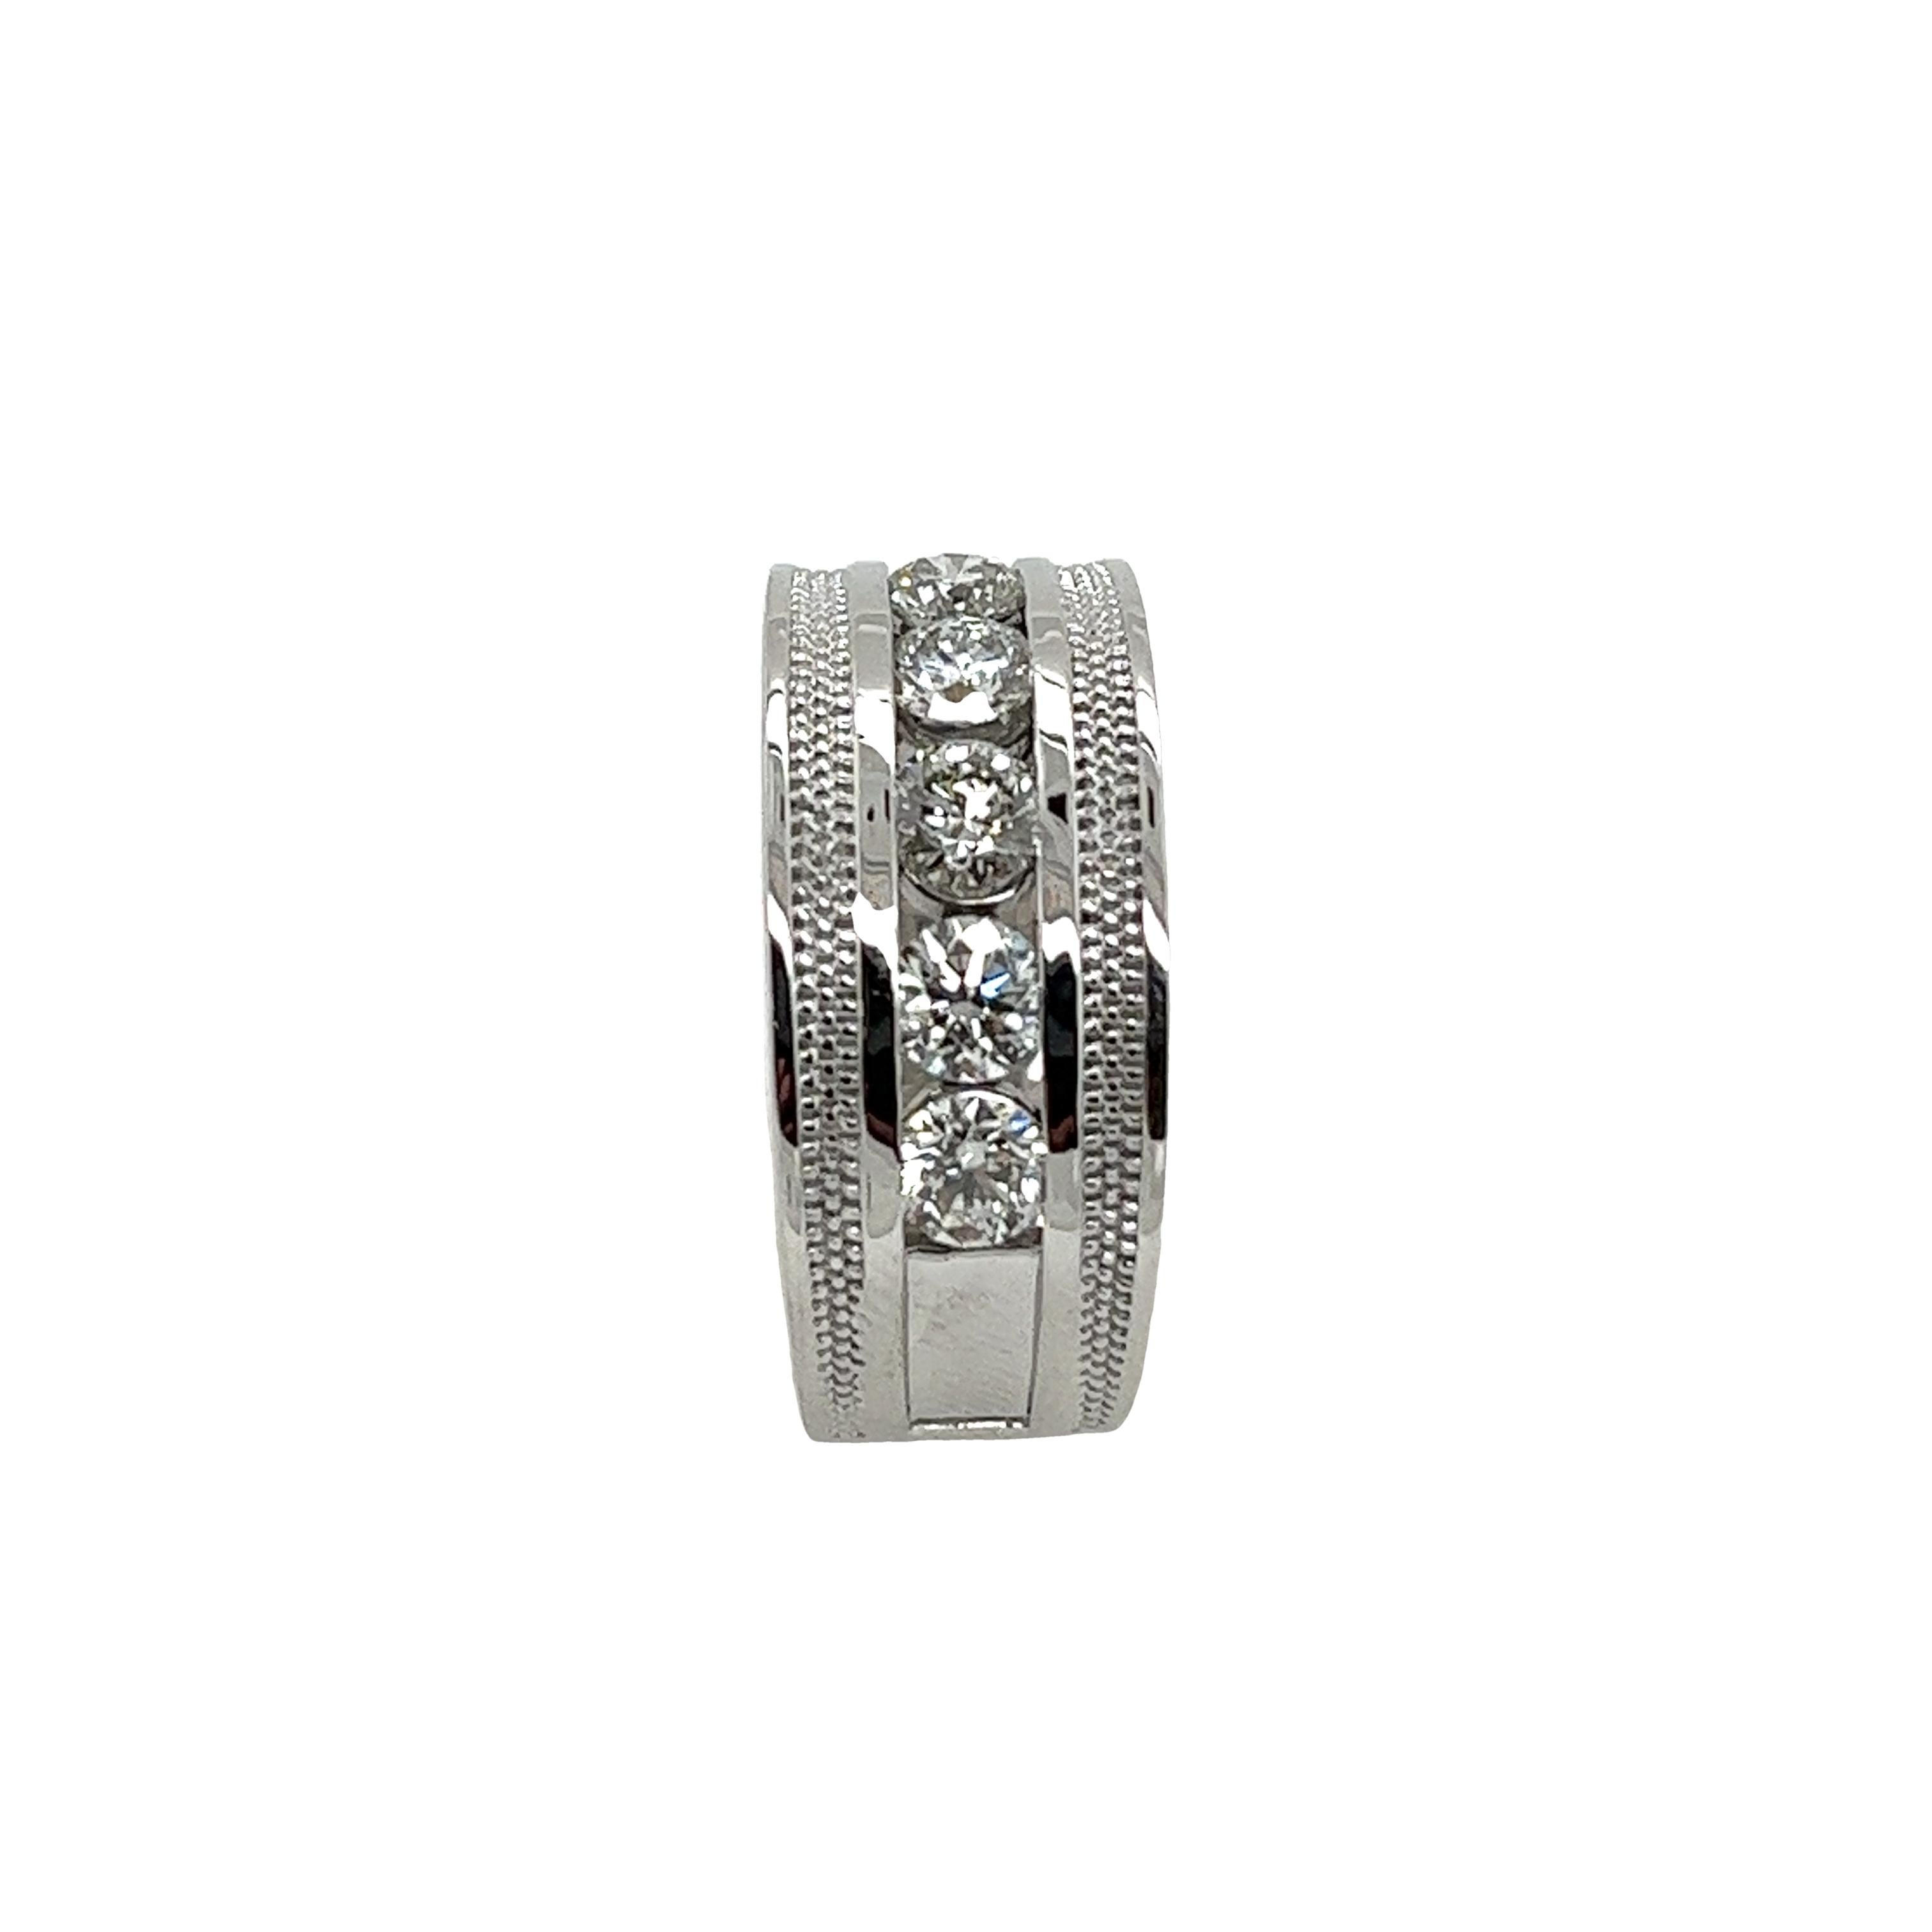 18ct White Gold 5 Stone Gia Diamond Ring, Set With 1.50ct G Colour IF clarity For Sale 2